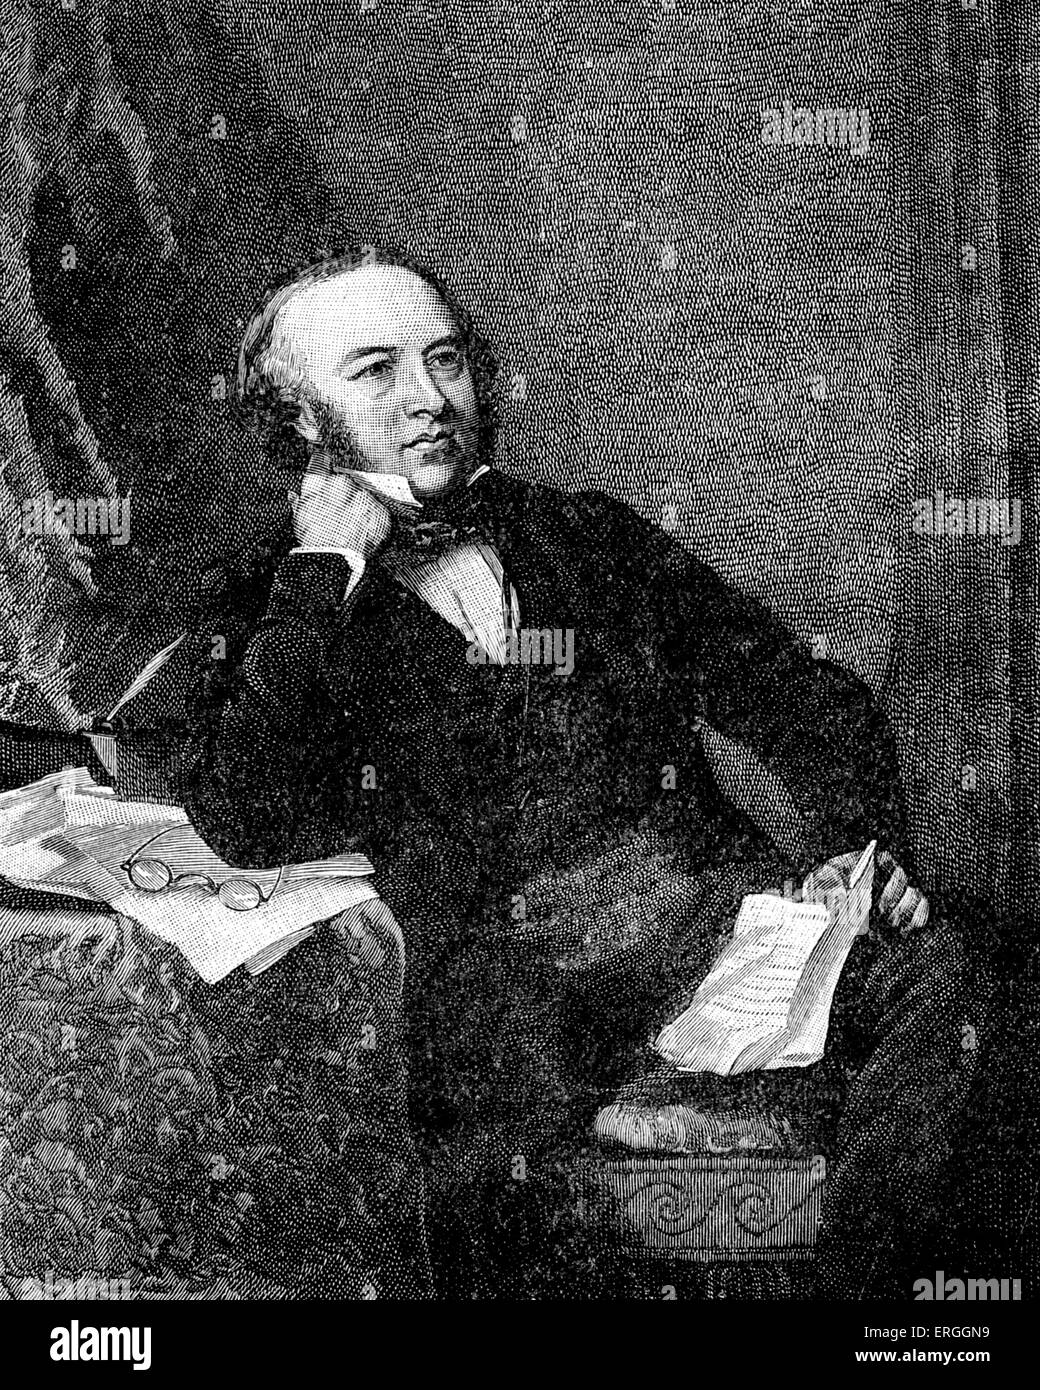 Sir Rowland Hill in 1847   portrait. English teacher, inventor and social reformer. Campaigner for postal system reform which Stock Photo